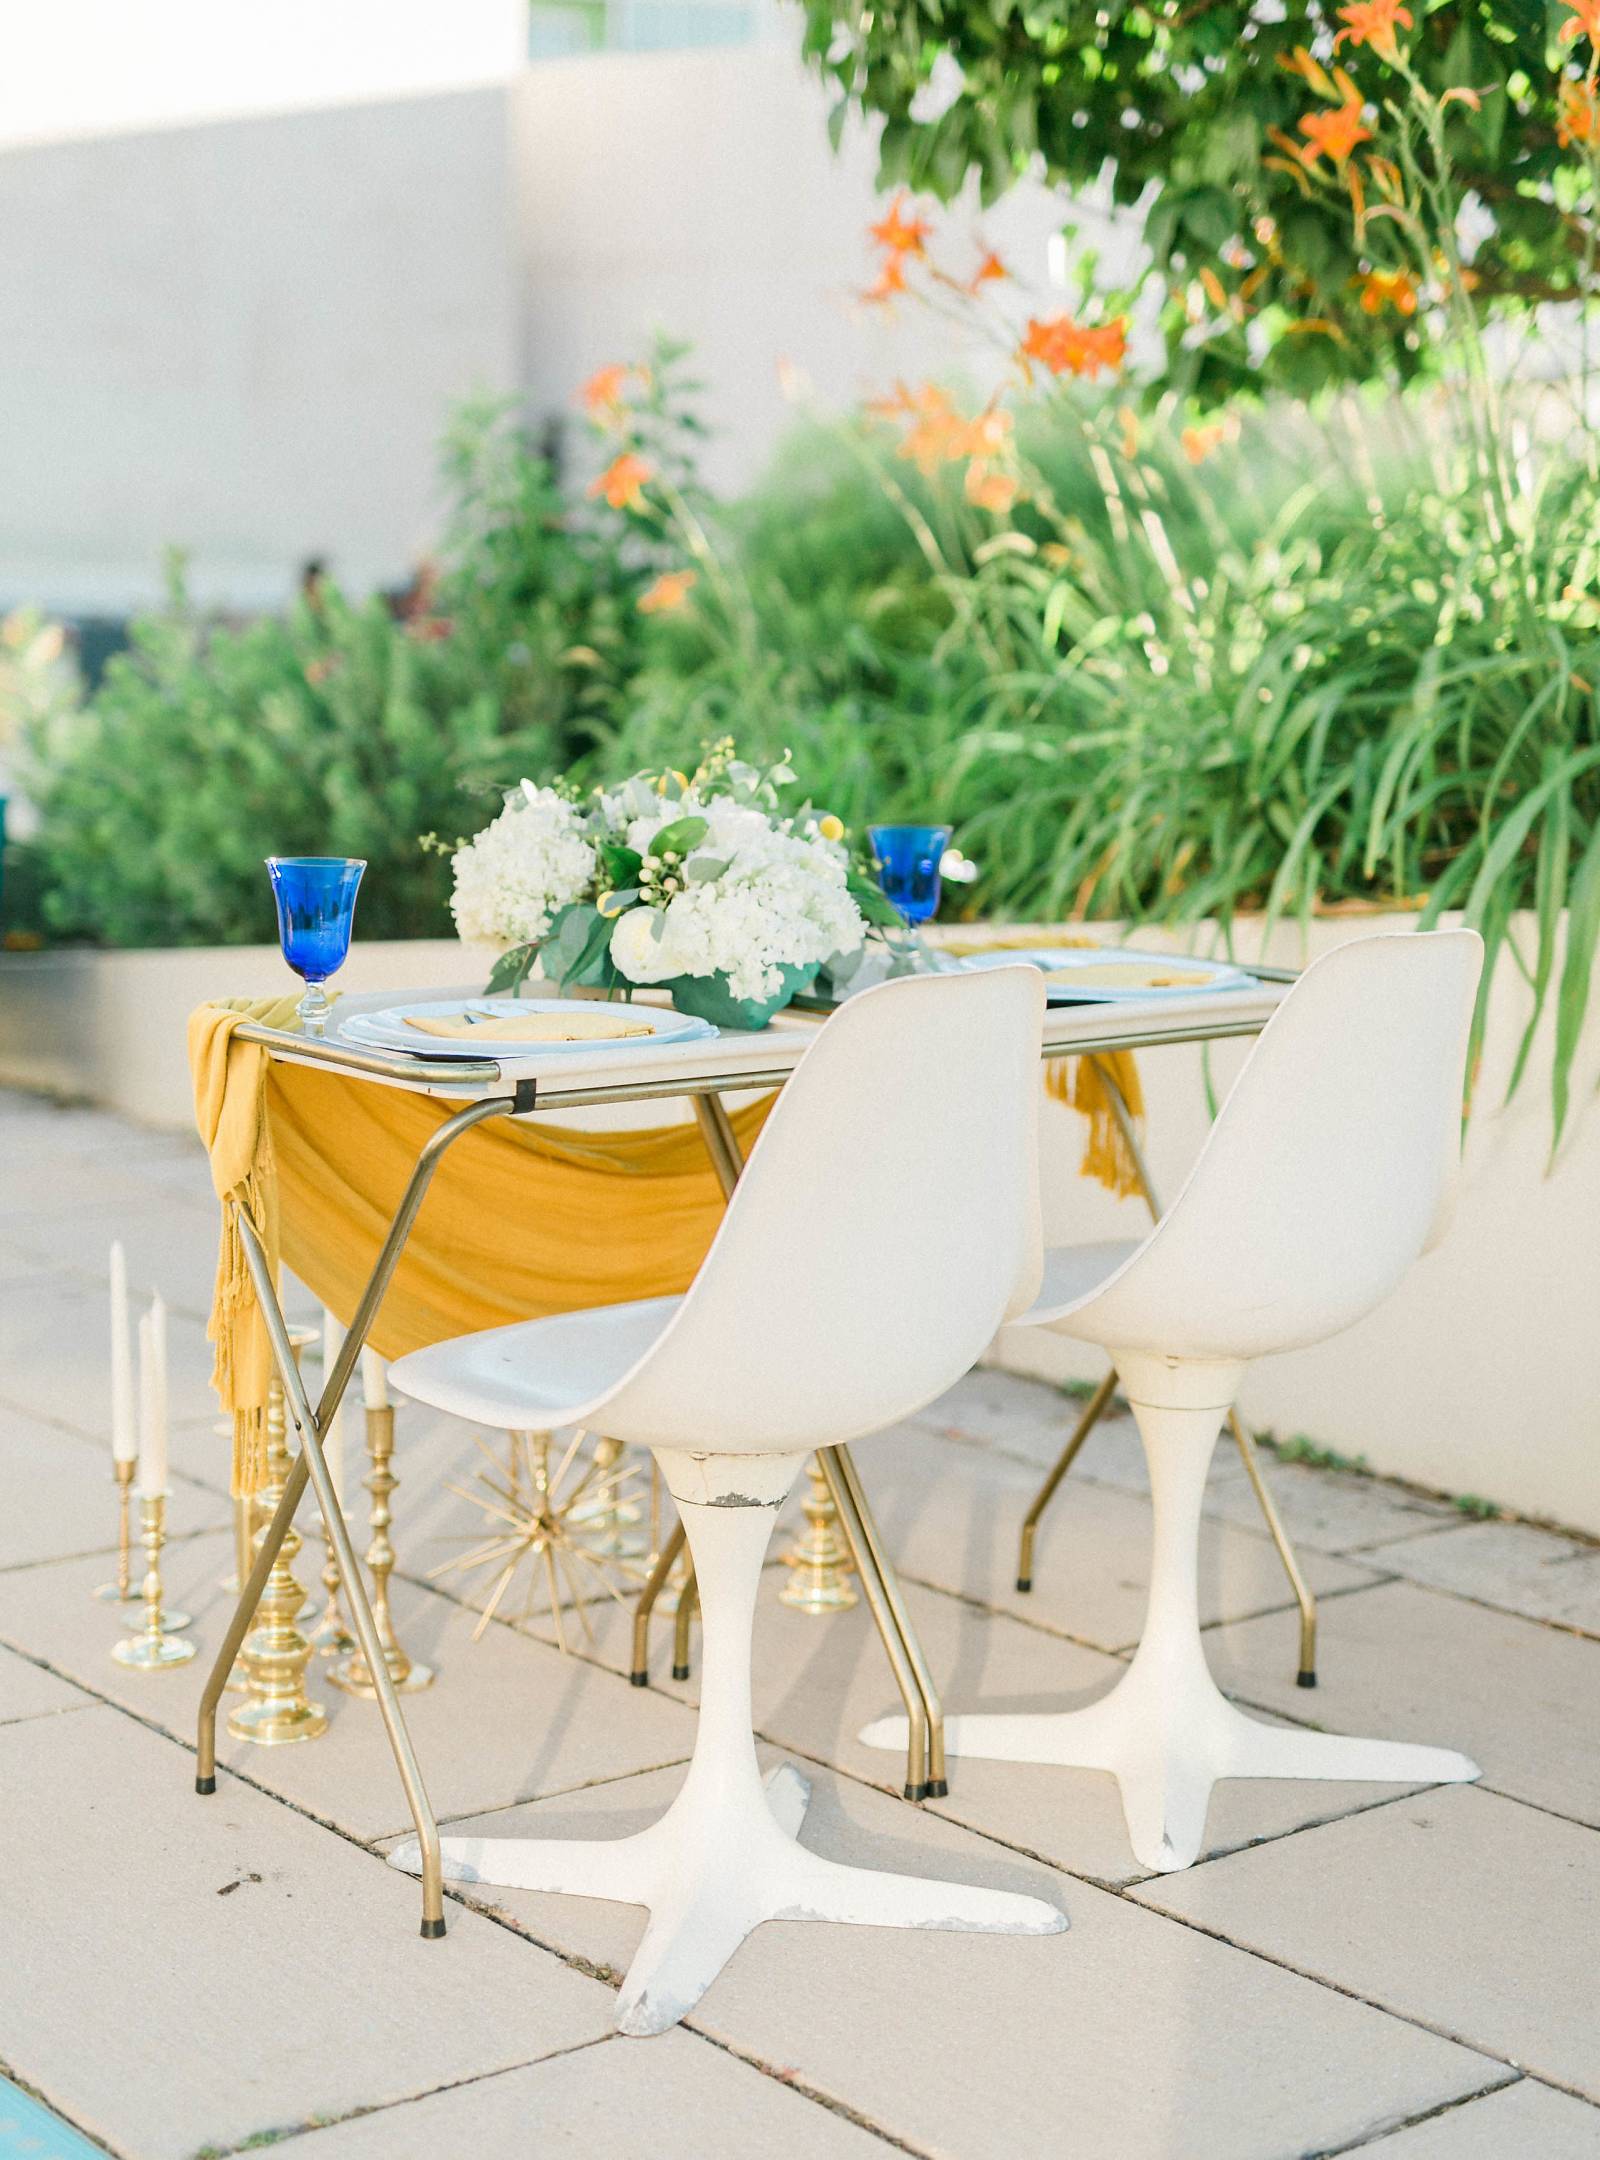 eclectic 1960s meets modern wedding tablescape